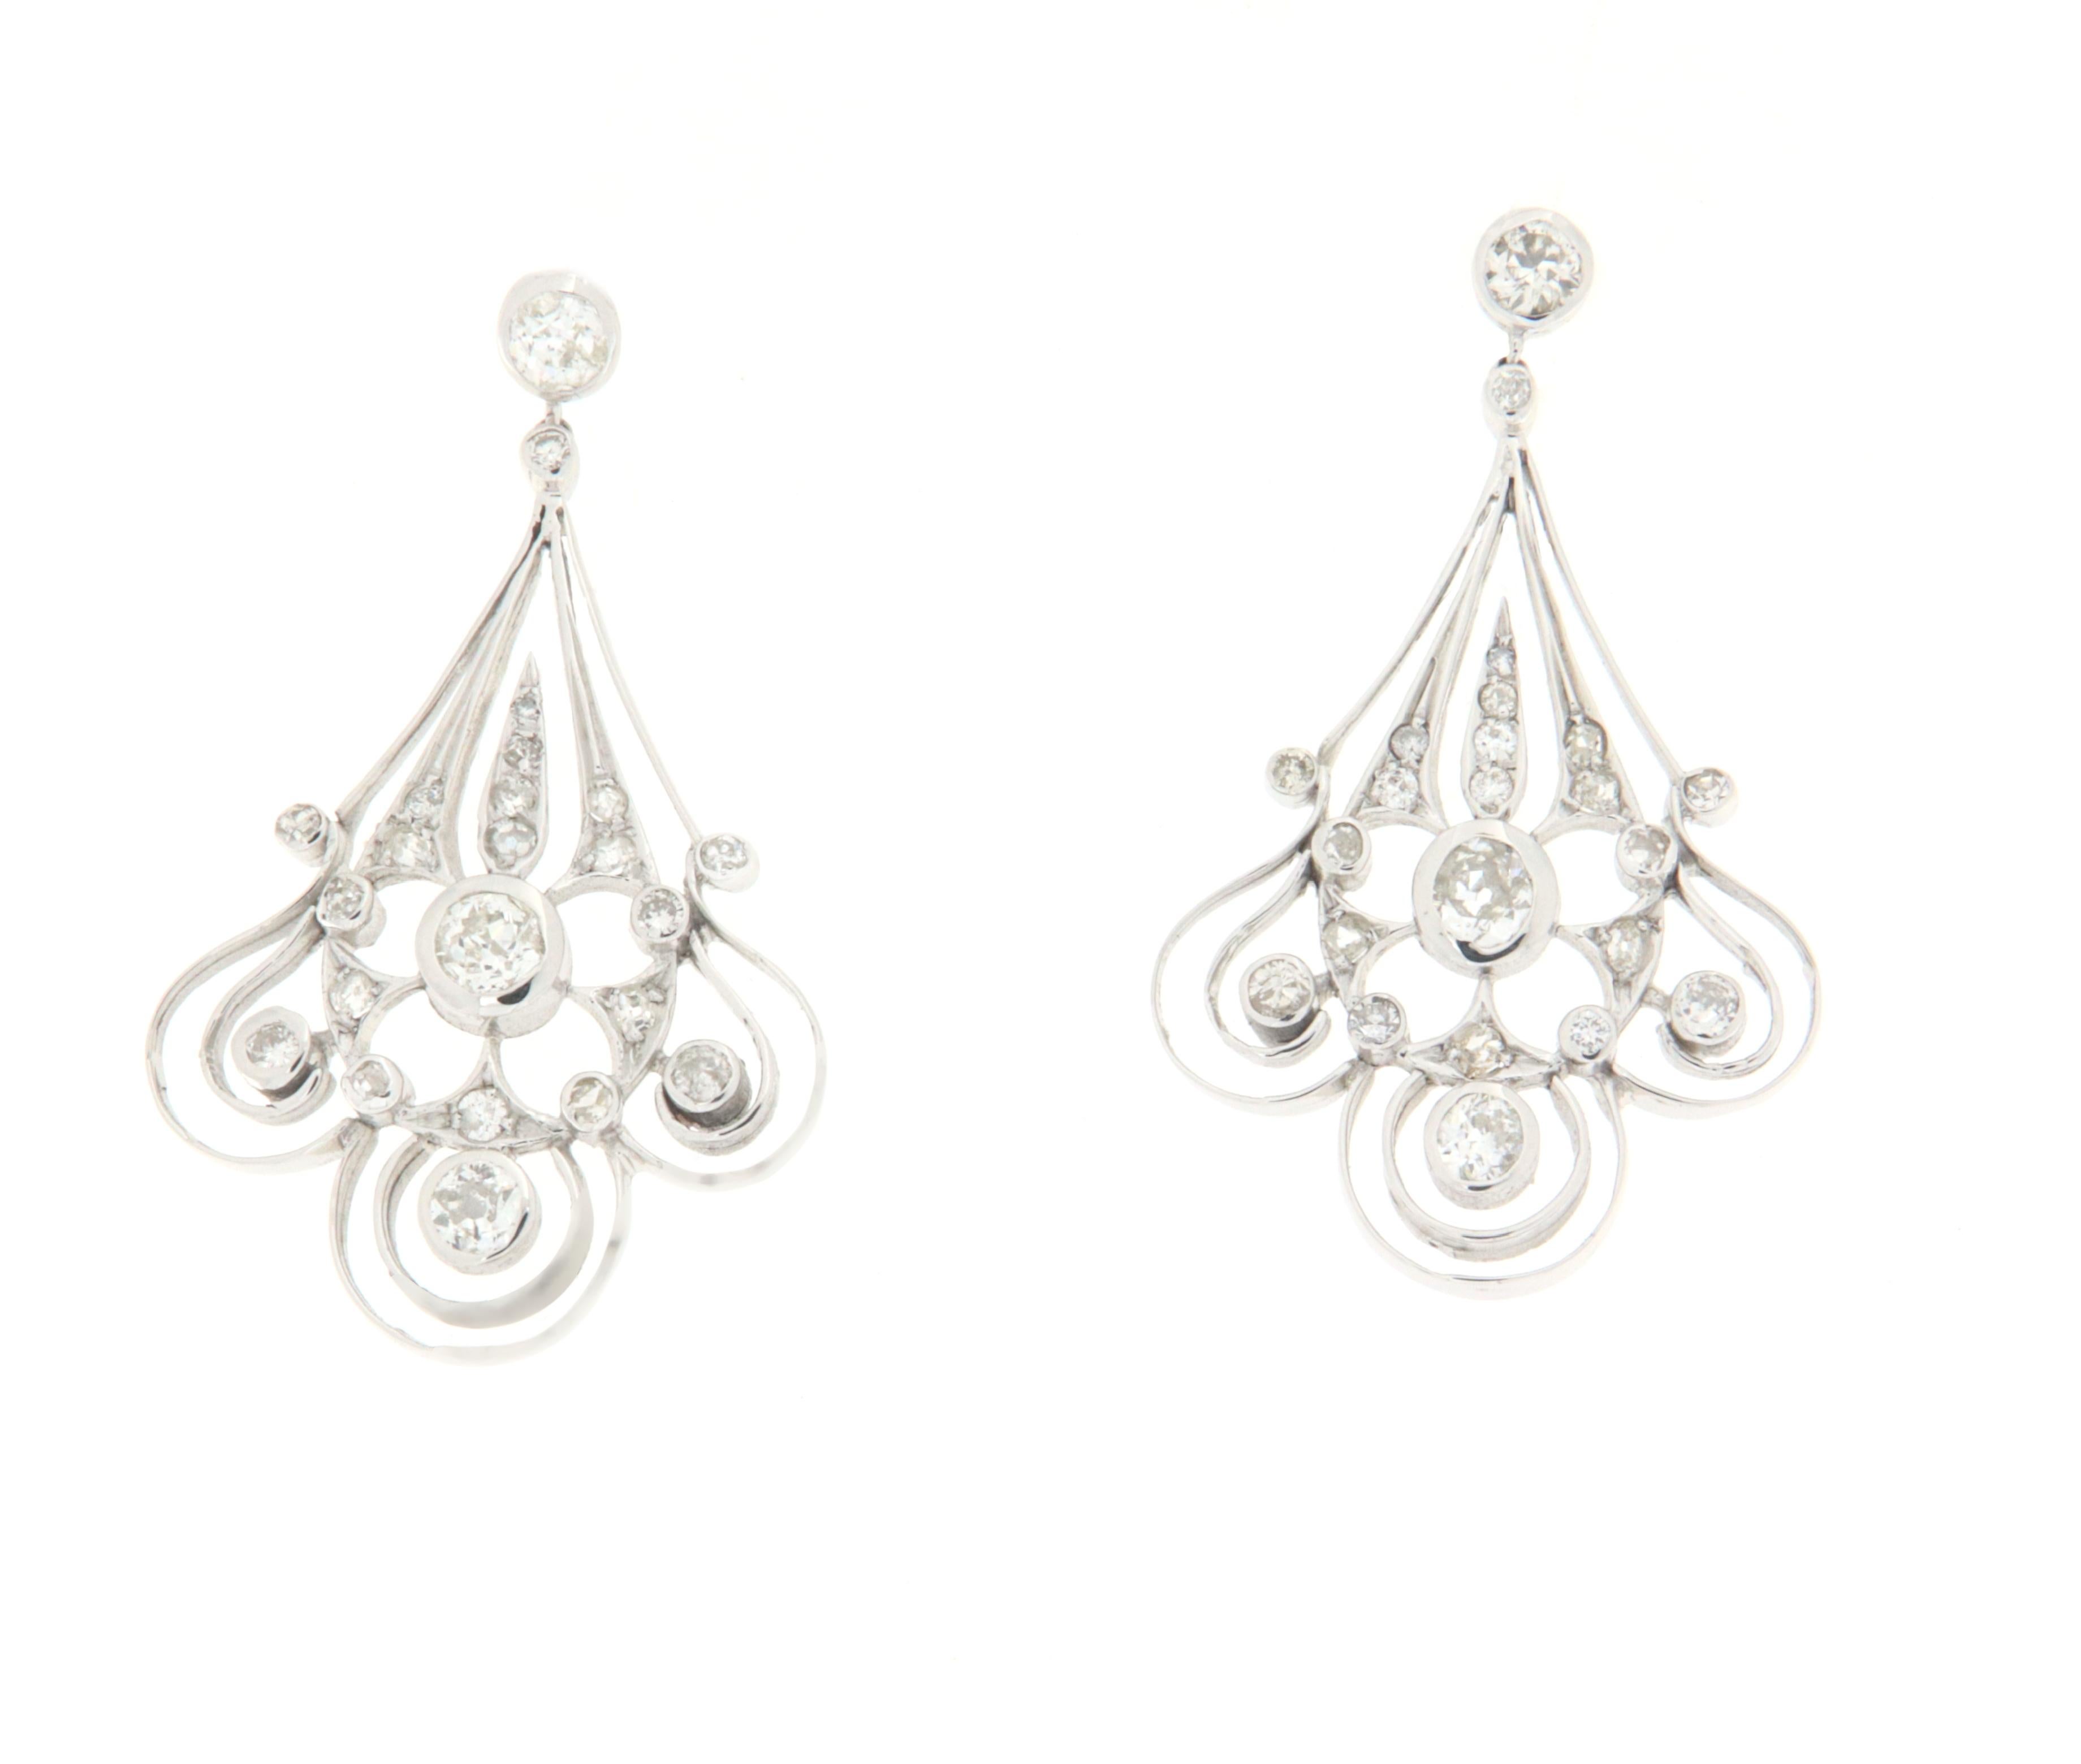 Delicious earring made entirely by hand. 18K white gold there are natural diamonds of different sizes.
A delicate and easily exhibited earring on any occasion that showcases the beauty of every woman.

Total weight of the earrings grams 